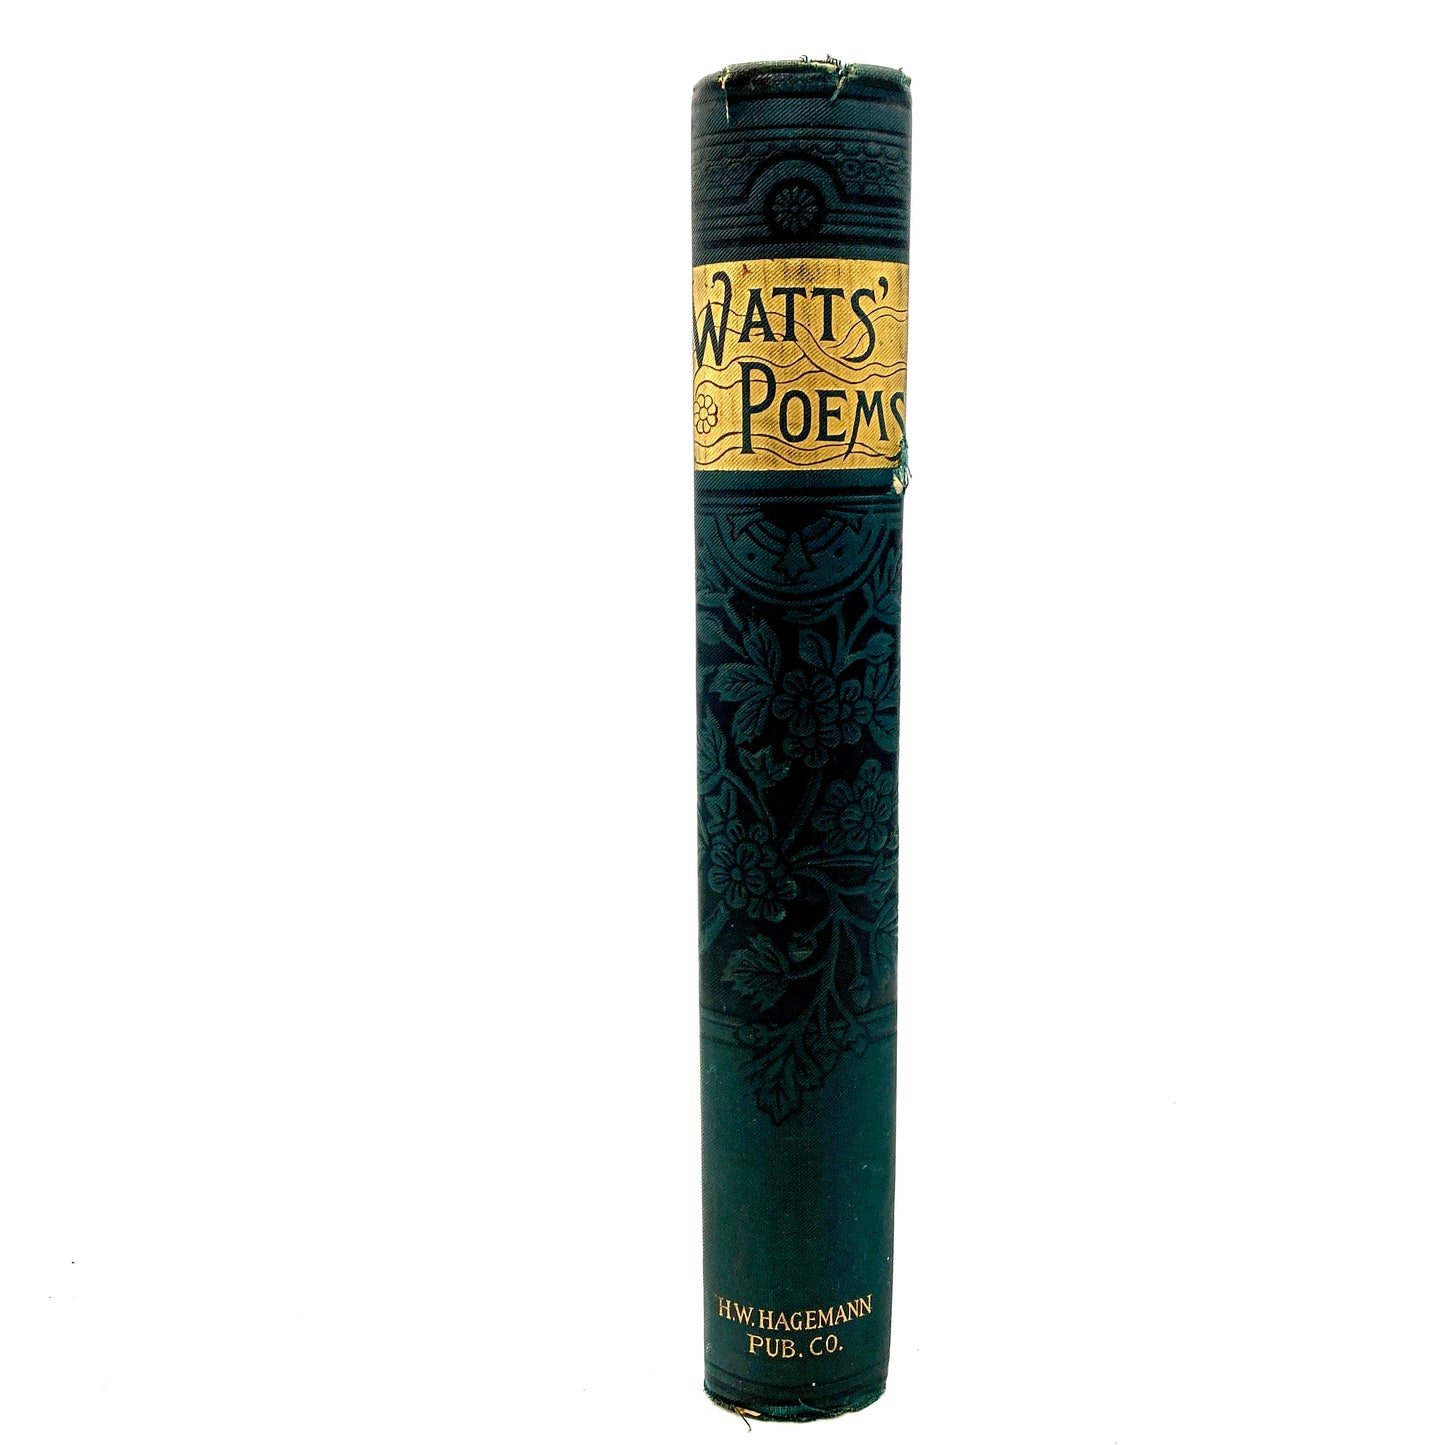 WATTS, Isaac "Divine and Moral Songs For the Use of Children" [H.W. Hagemann, 1894] - Buzz Bookstore